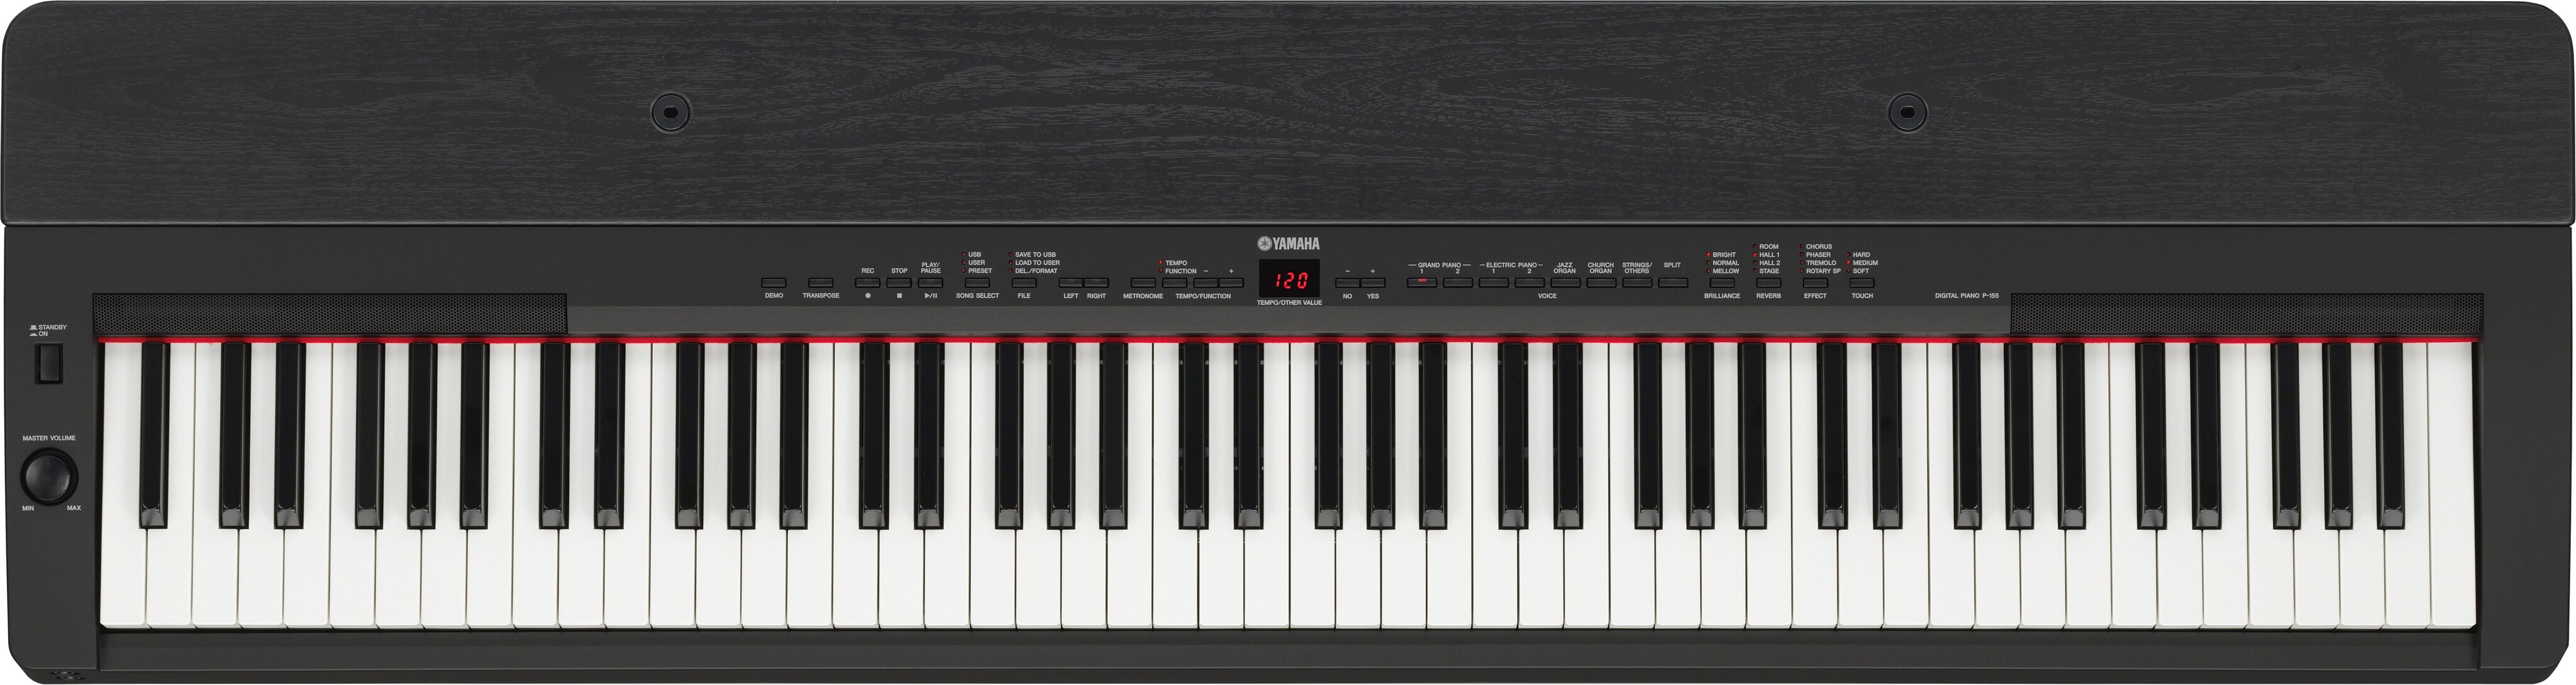 P-155 - Overview - P Series - Pianos - Musical Instruments 